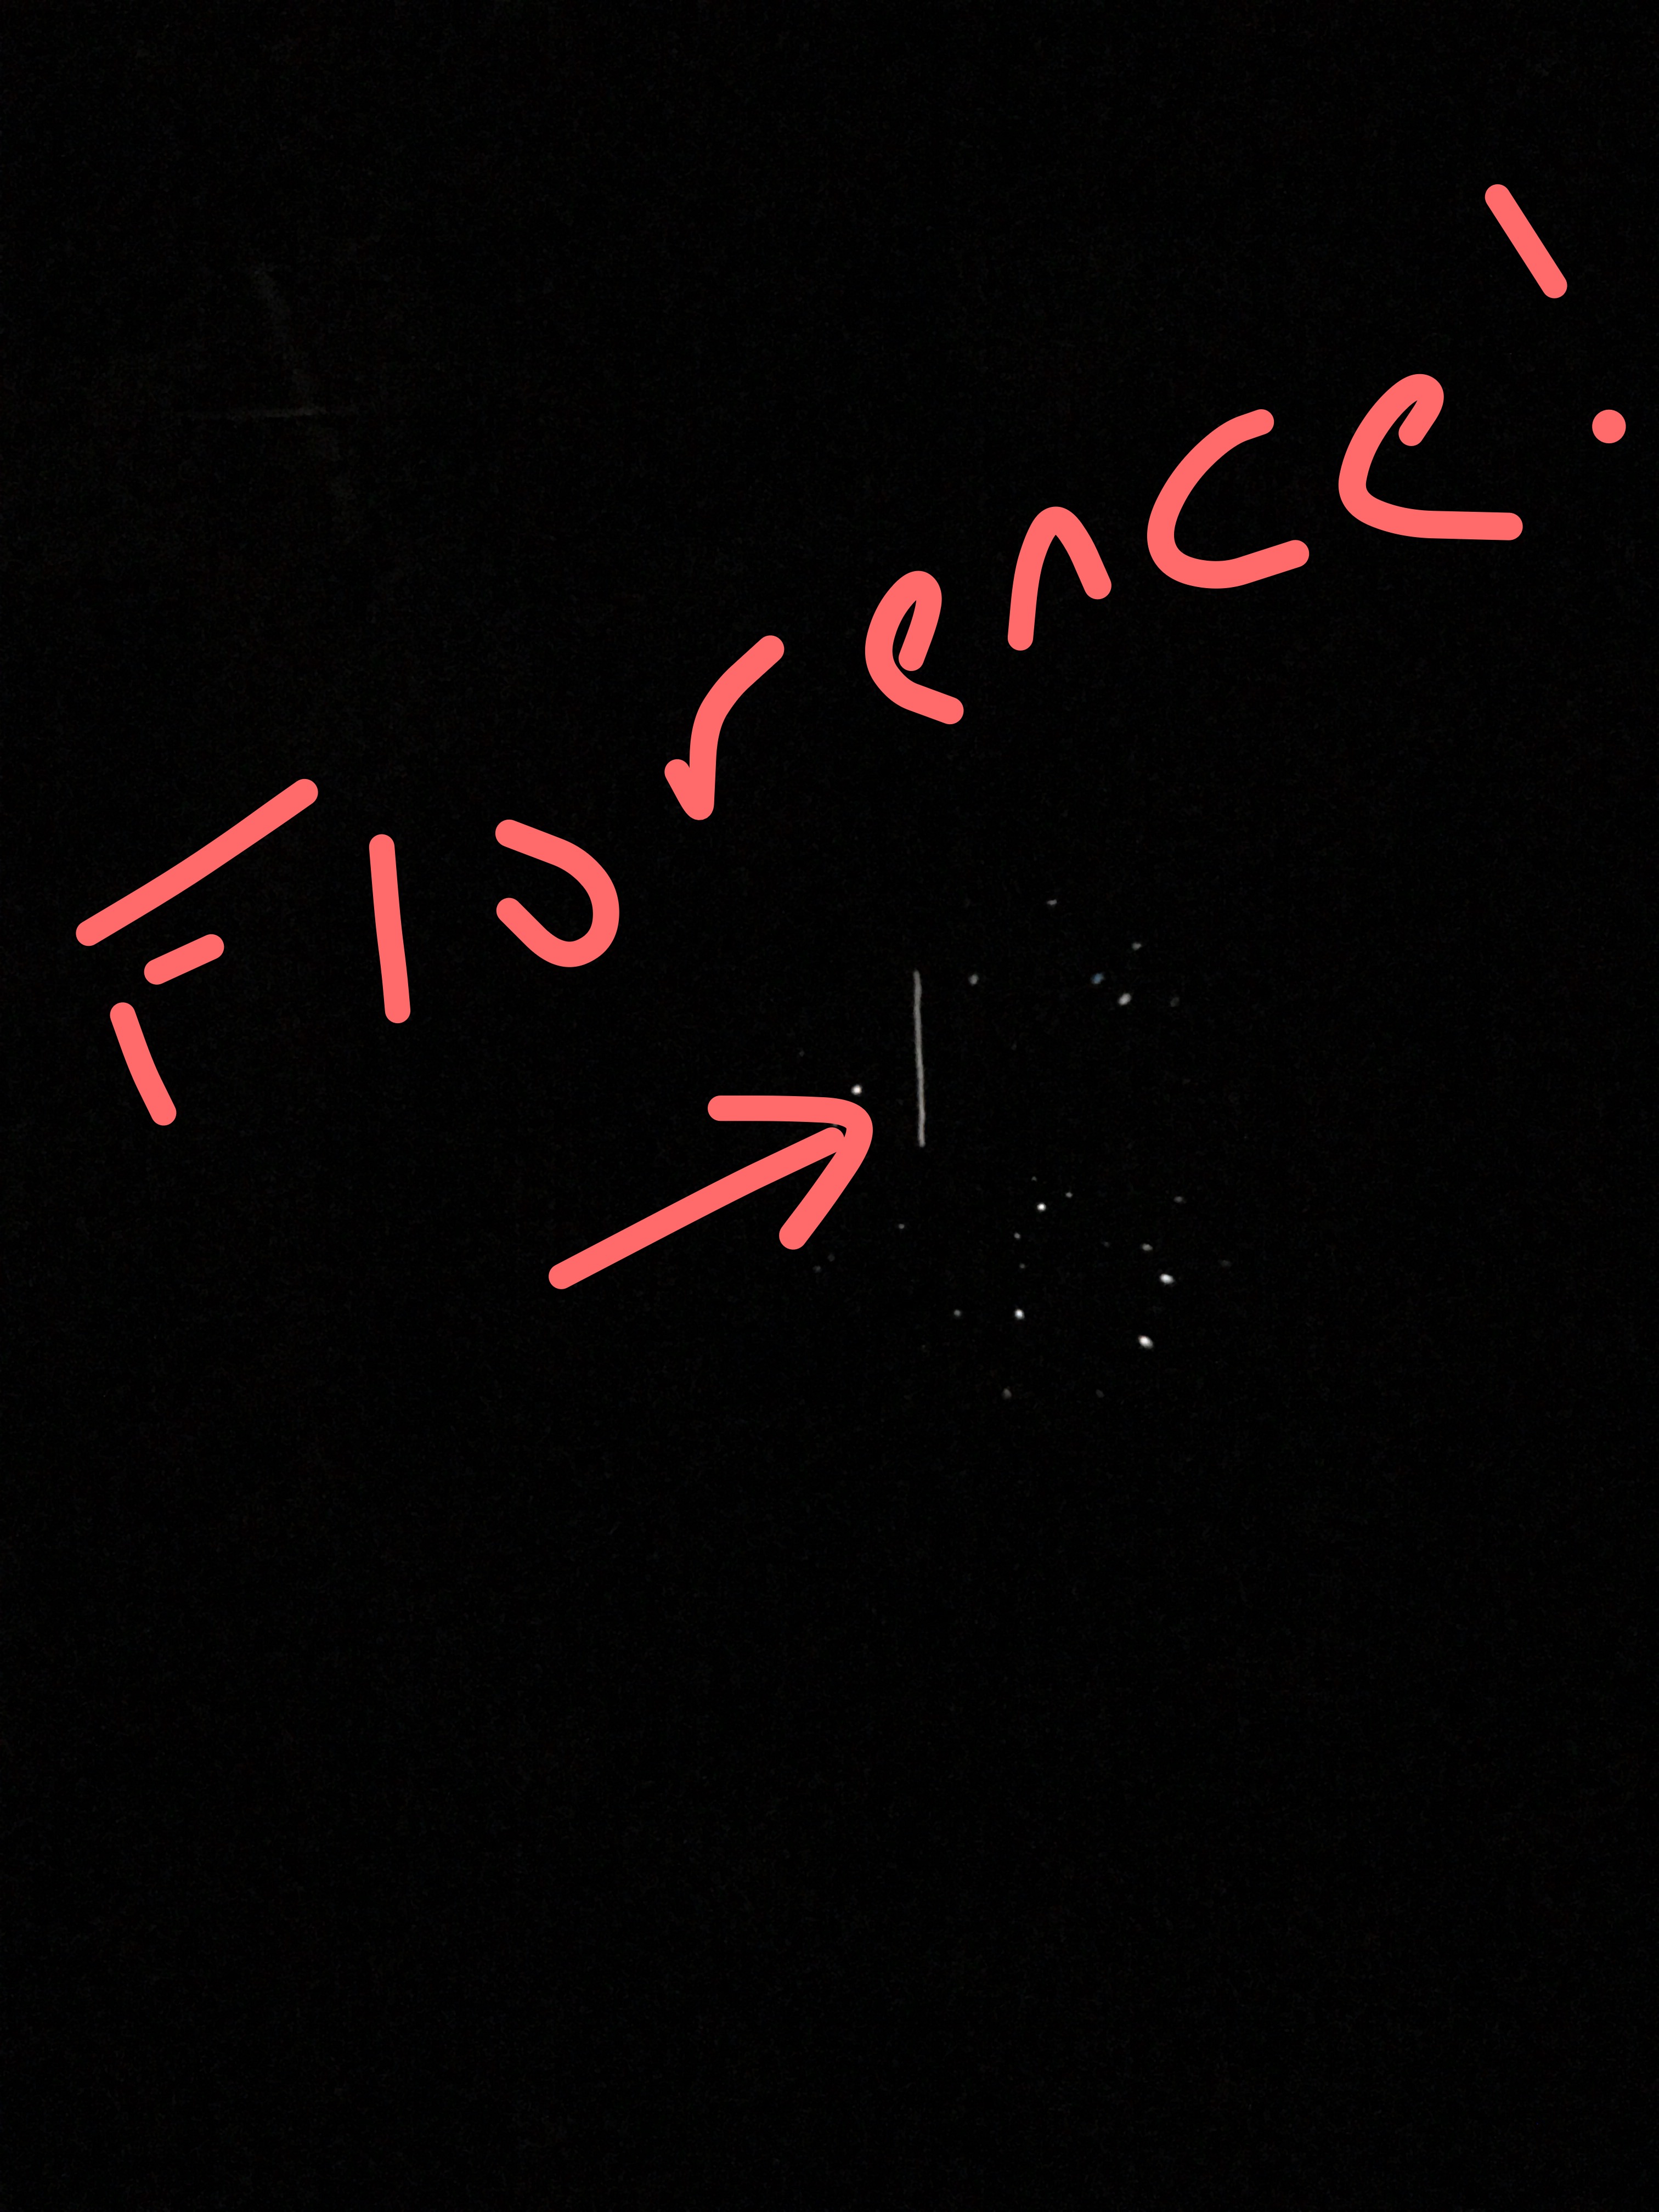 Asteroid Florence seen in the eyepiece after 20 min of observation (credit: F. Marchis)